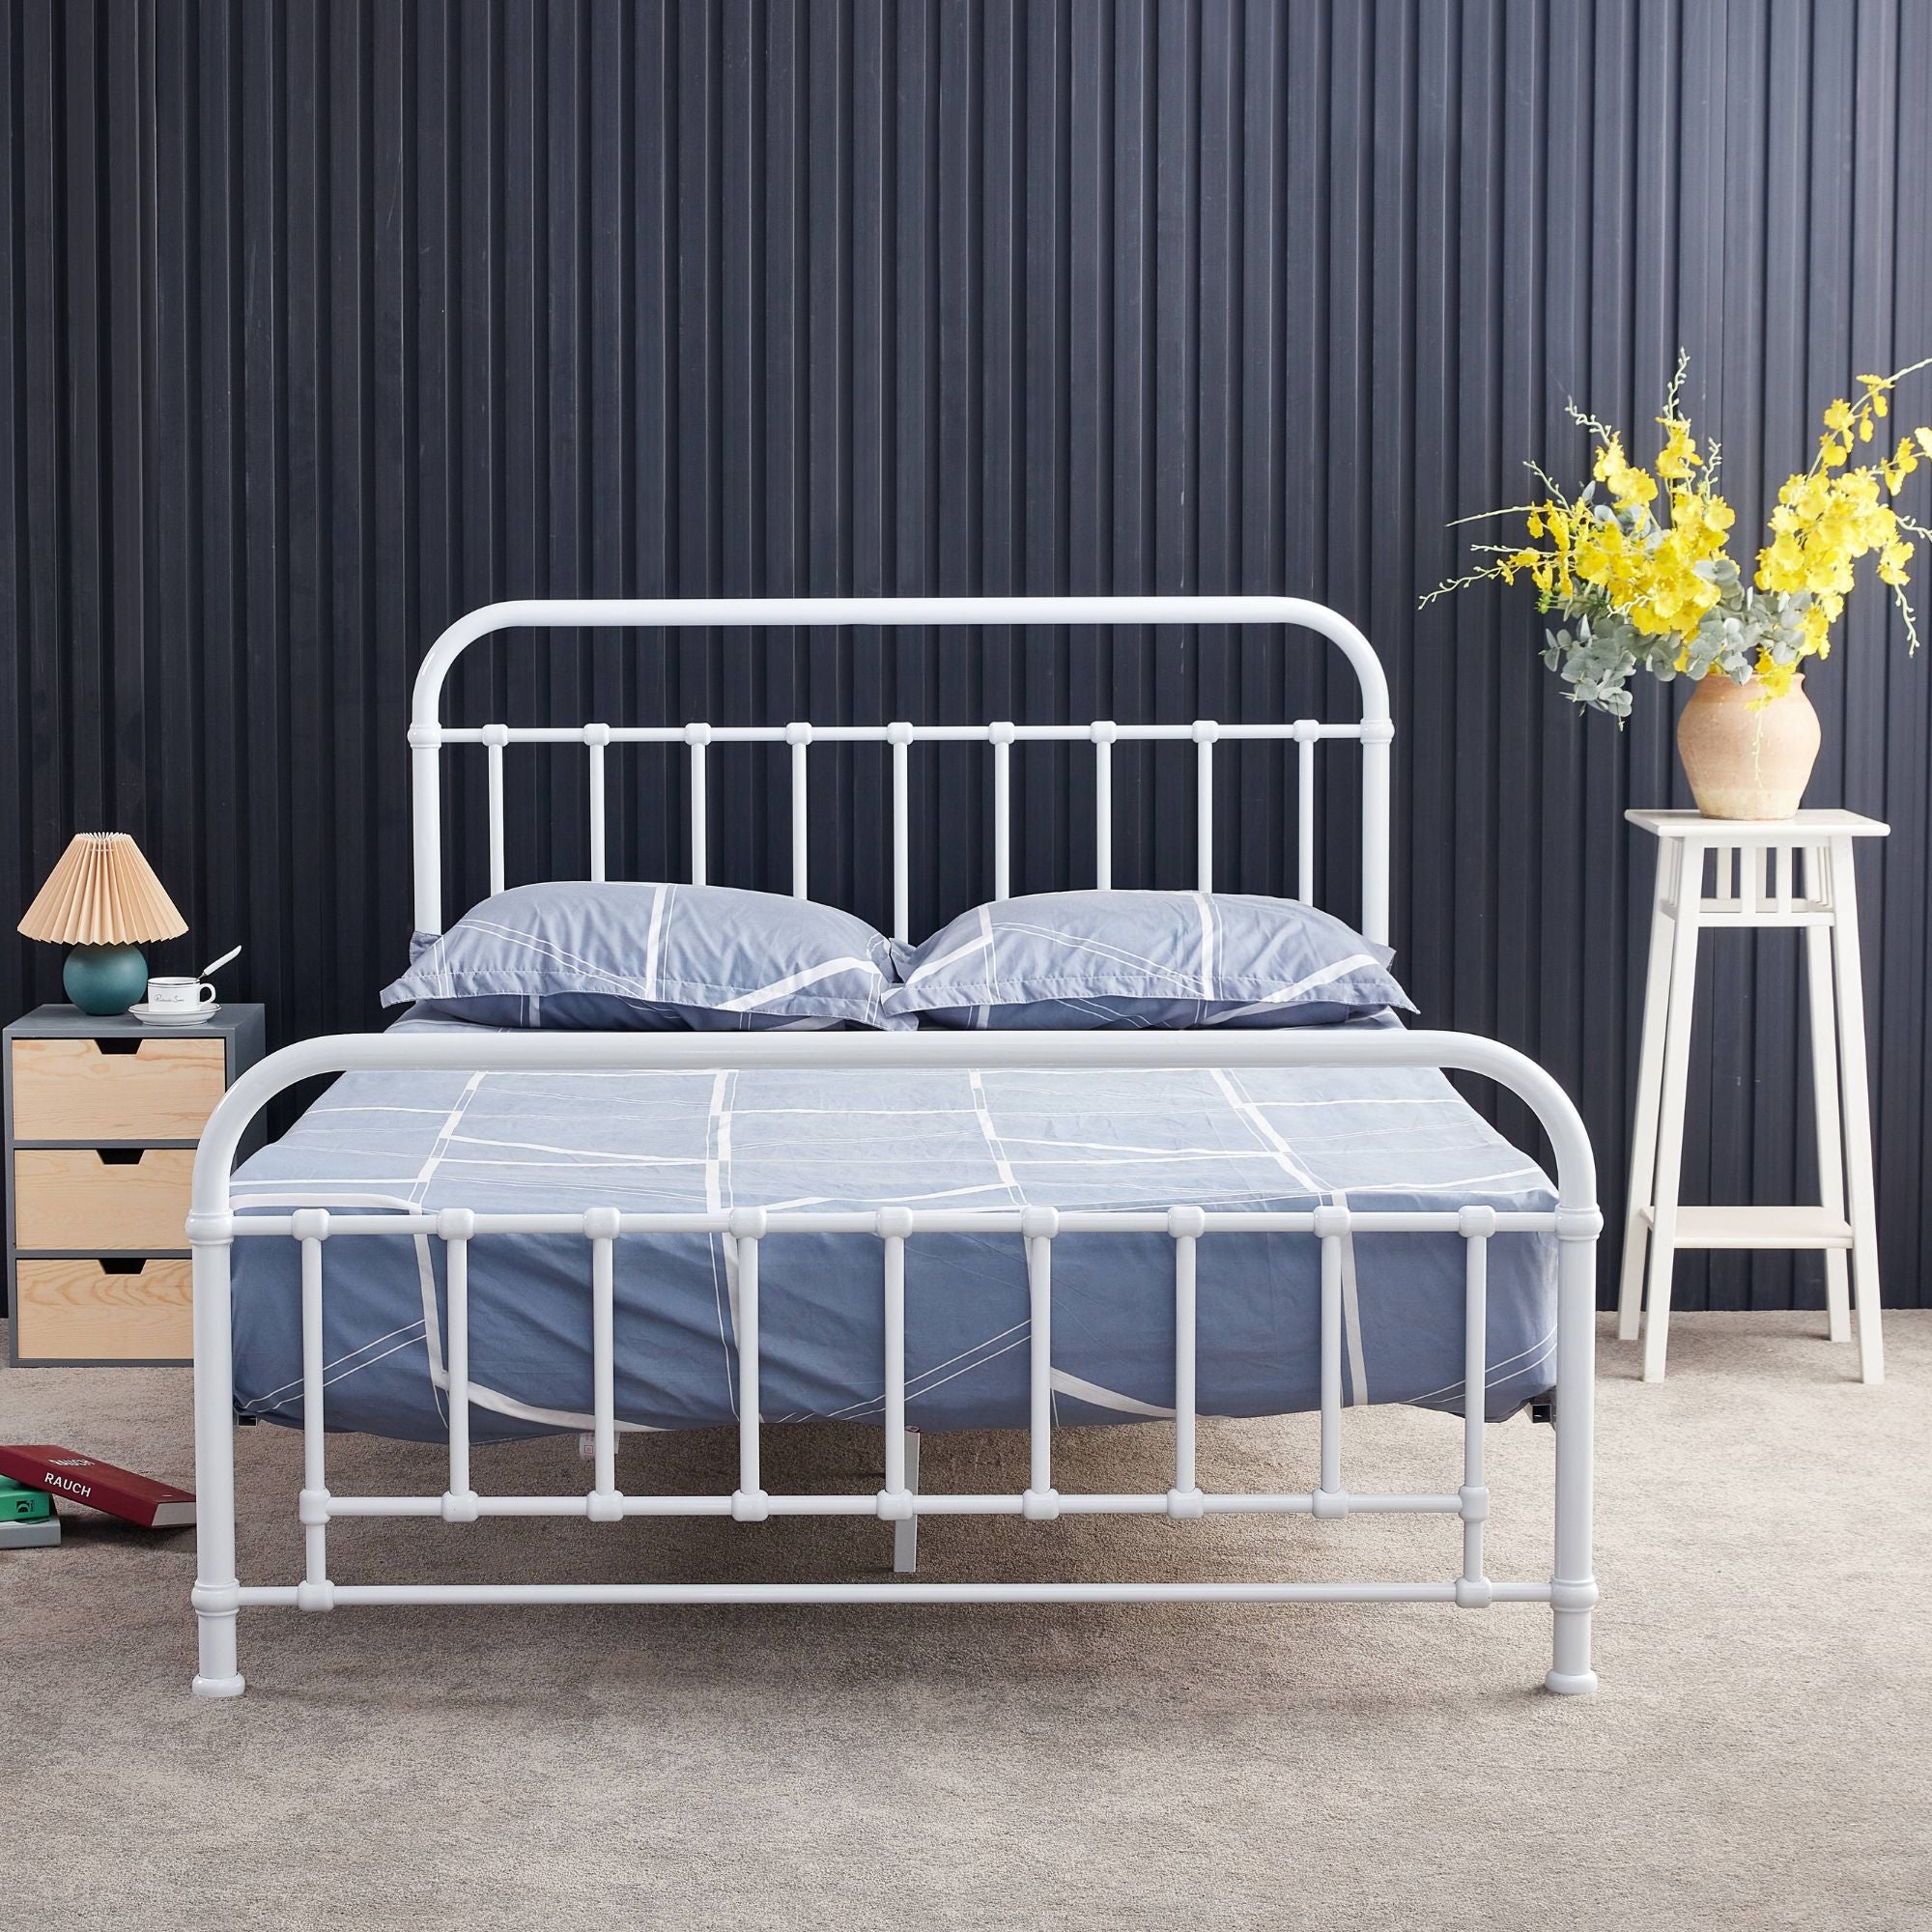 Double Size Bed Frame Metal - White